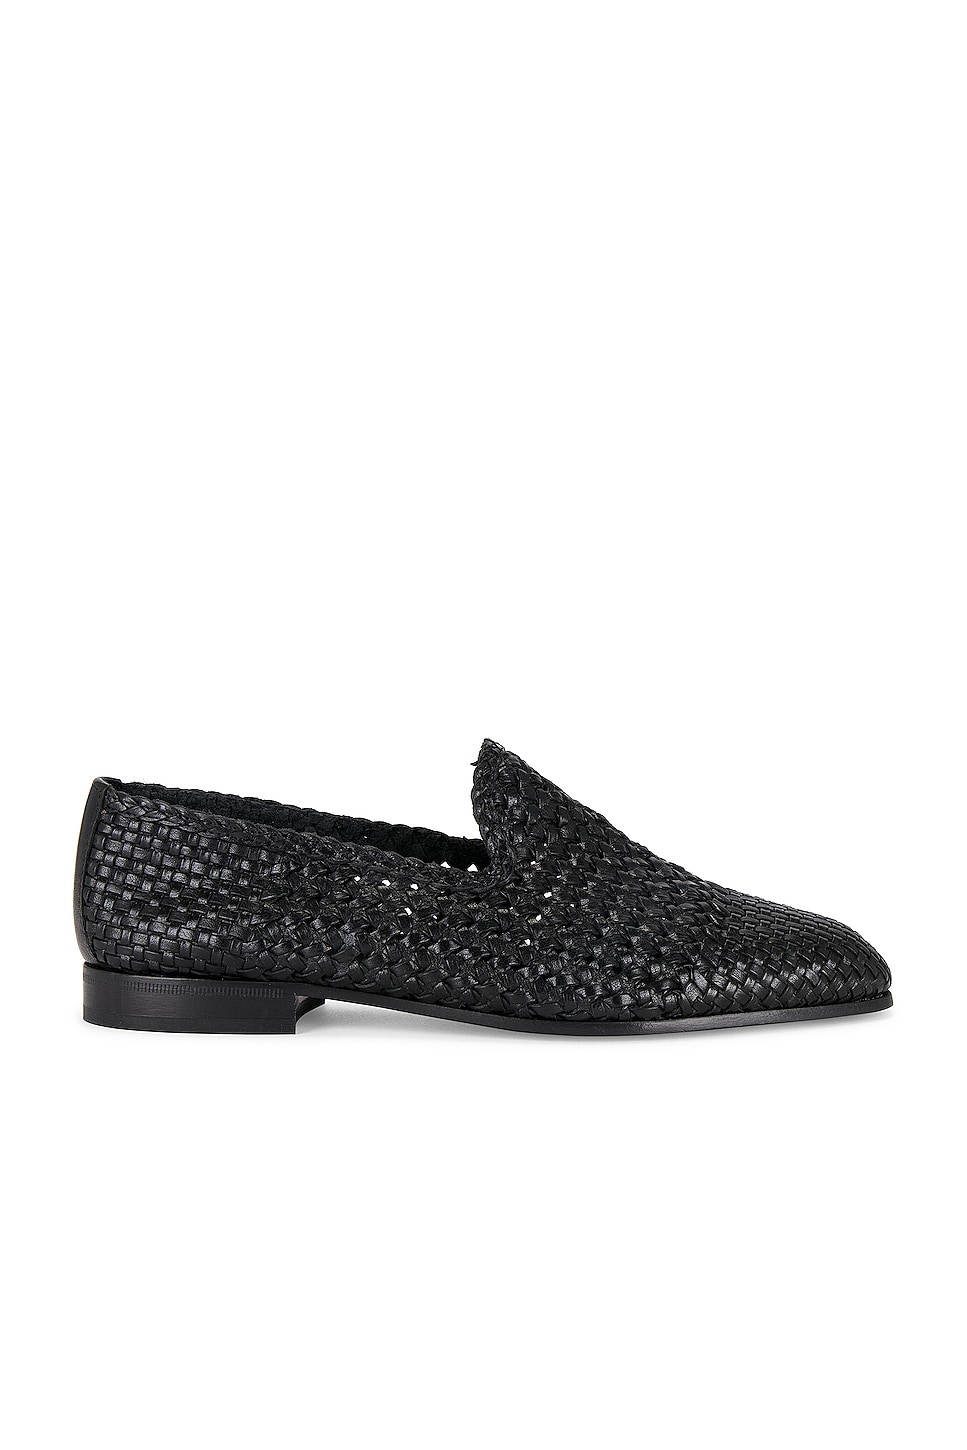 Image 1 of The Row Davis Loafer in Black